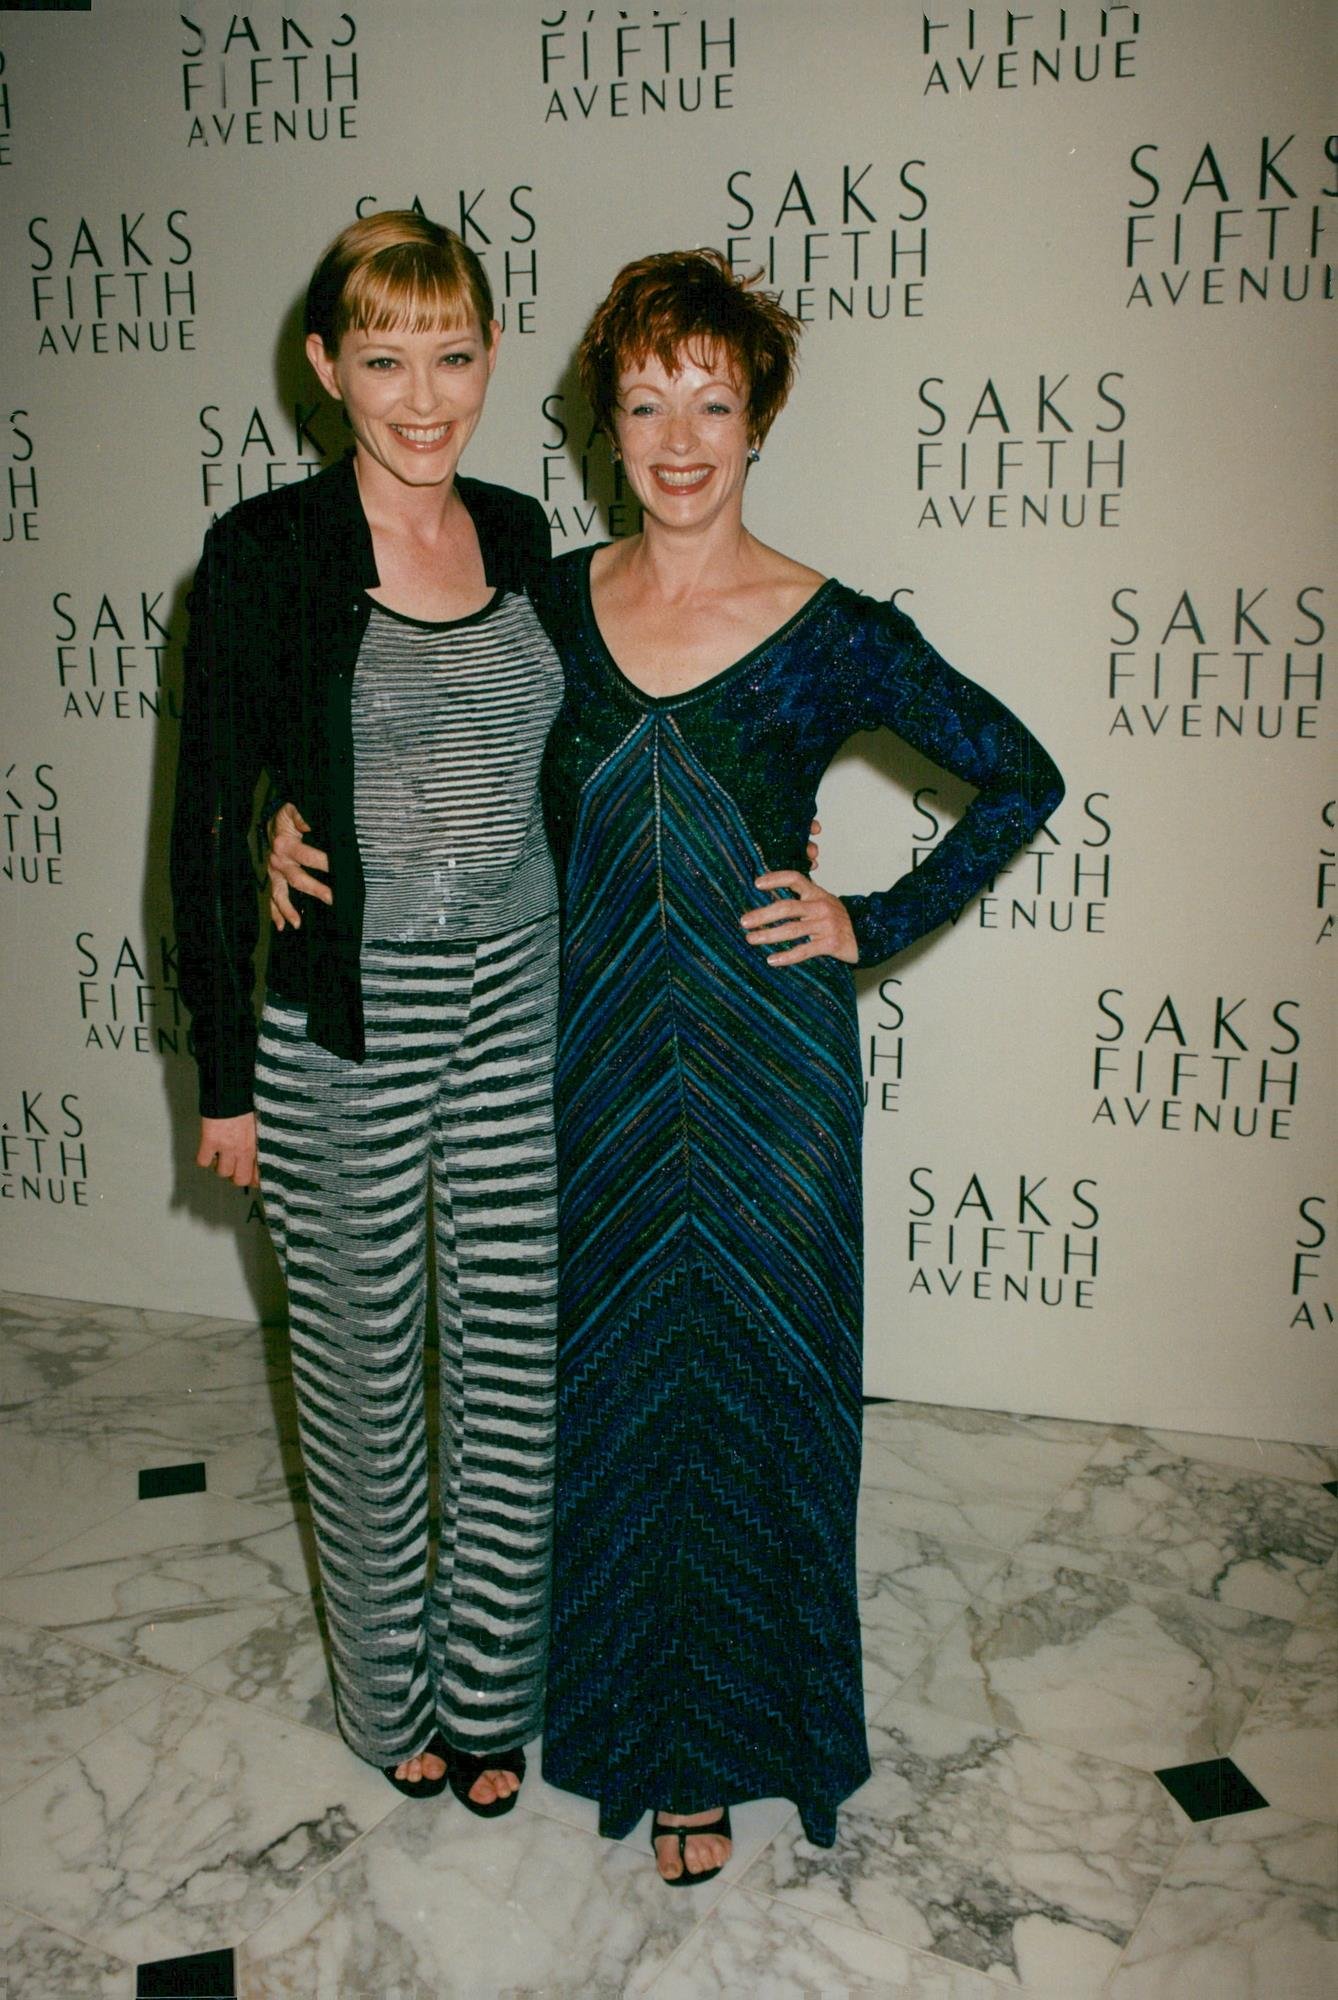 Vintage photo of Frances Fisher and Pamela Gadley at Saks Fifth Avenues MS Charity